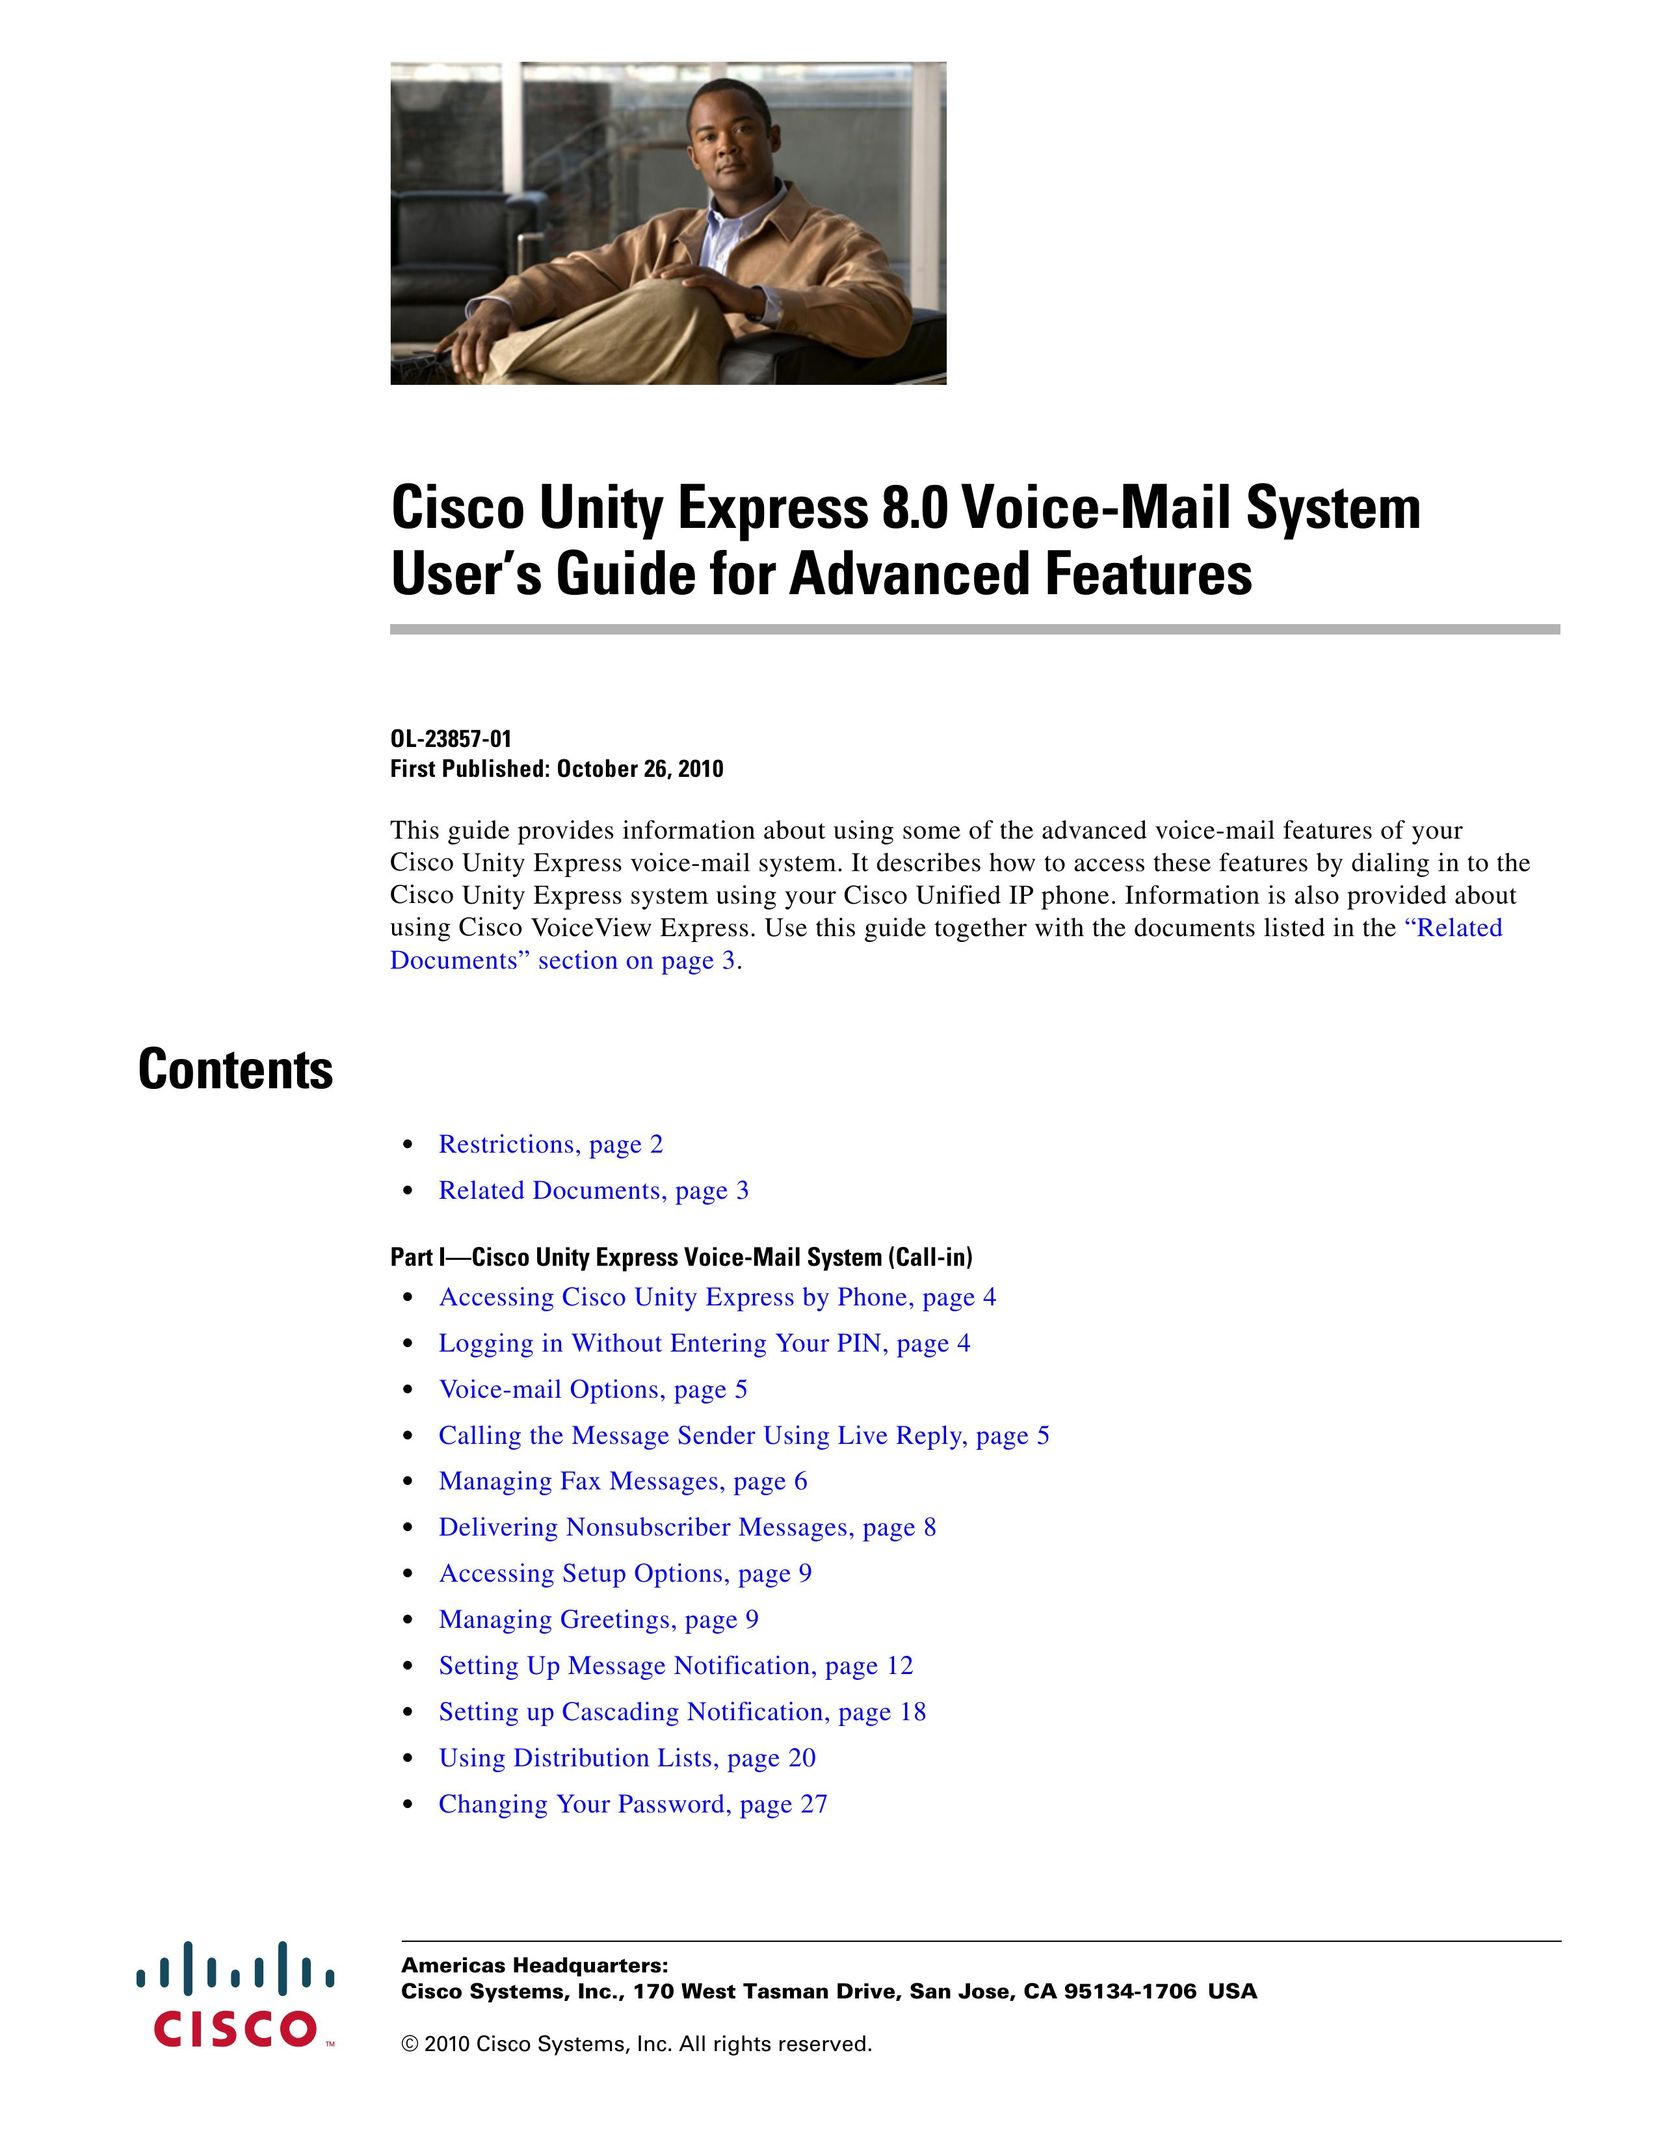 Cisco Systems OL-23857-01 Answering Machine User Manual